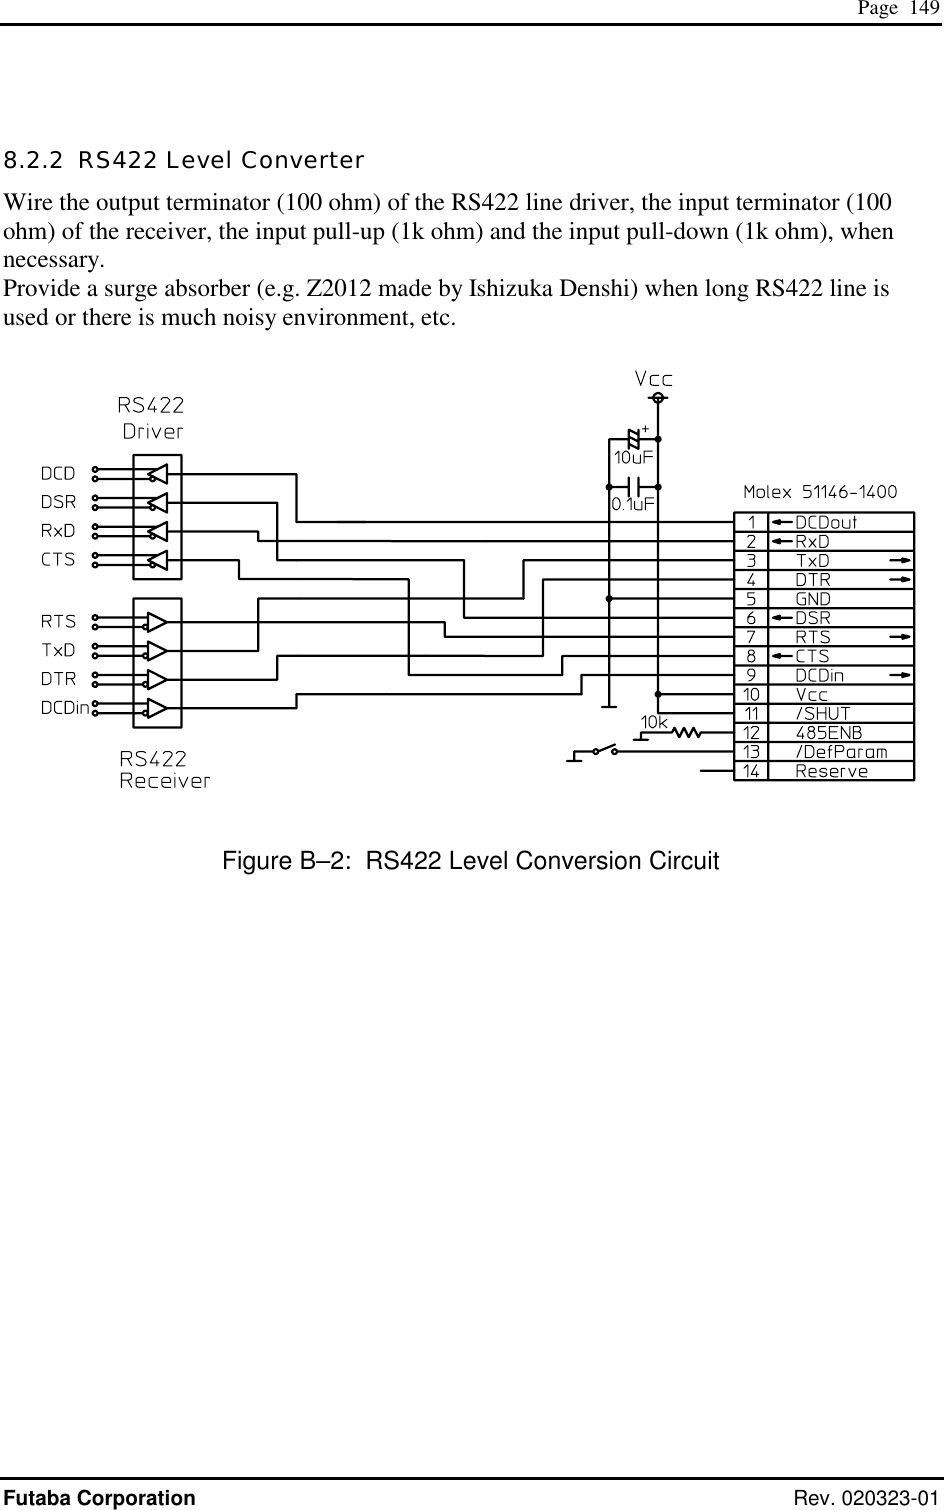  Page  149 Futaba Corporation Rev. 020323-01  8.2.2  RS422 Level Converter Wire the output terminator (100 ohm) of the RS422 line driver, the input terminator (100 ohm) of the receiver, the input pull-up (1k ohm) and the input pull-down (1k ohm), when necessary. Provide a surge absorber (e.g. Z2012 made by Ishizuka Denshi) when long RS422 line is used or there is much noisy environment, etc.    Figure B–2:  RS422 Level Conversion Circuit 